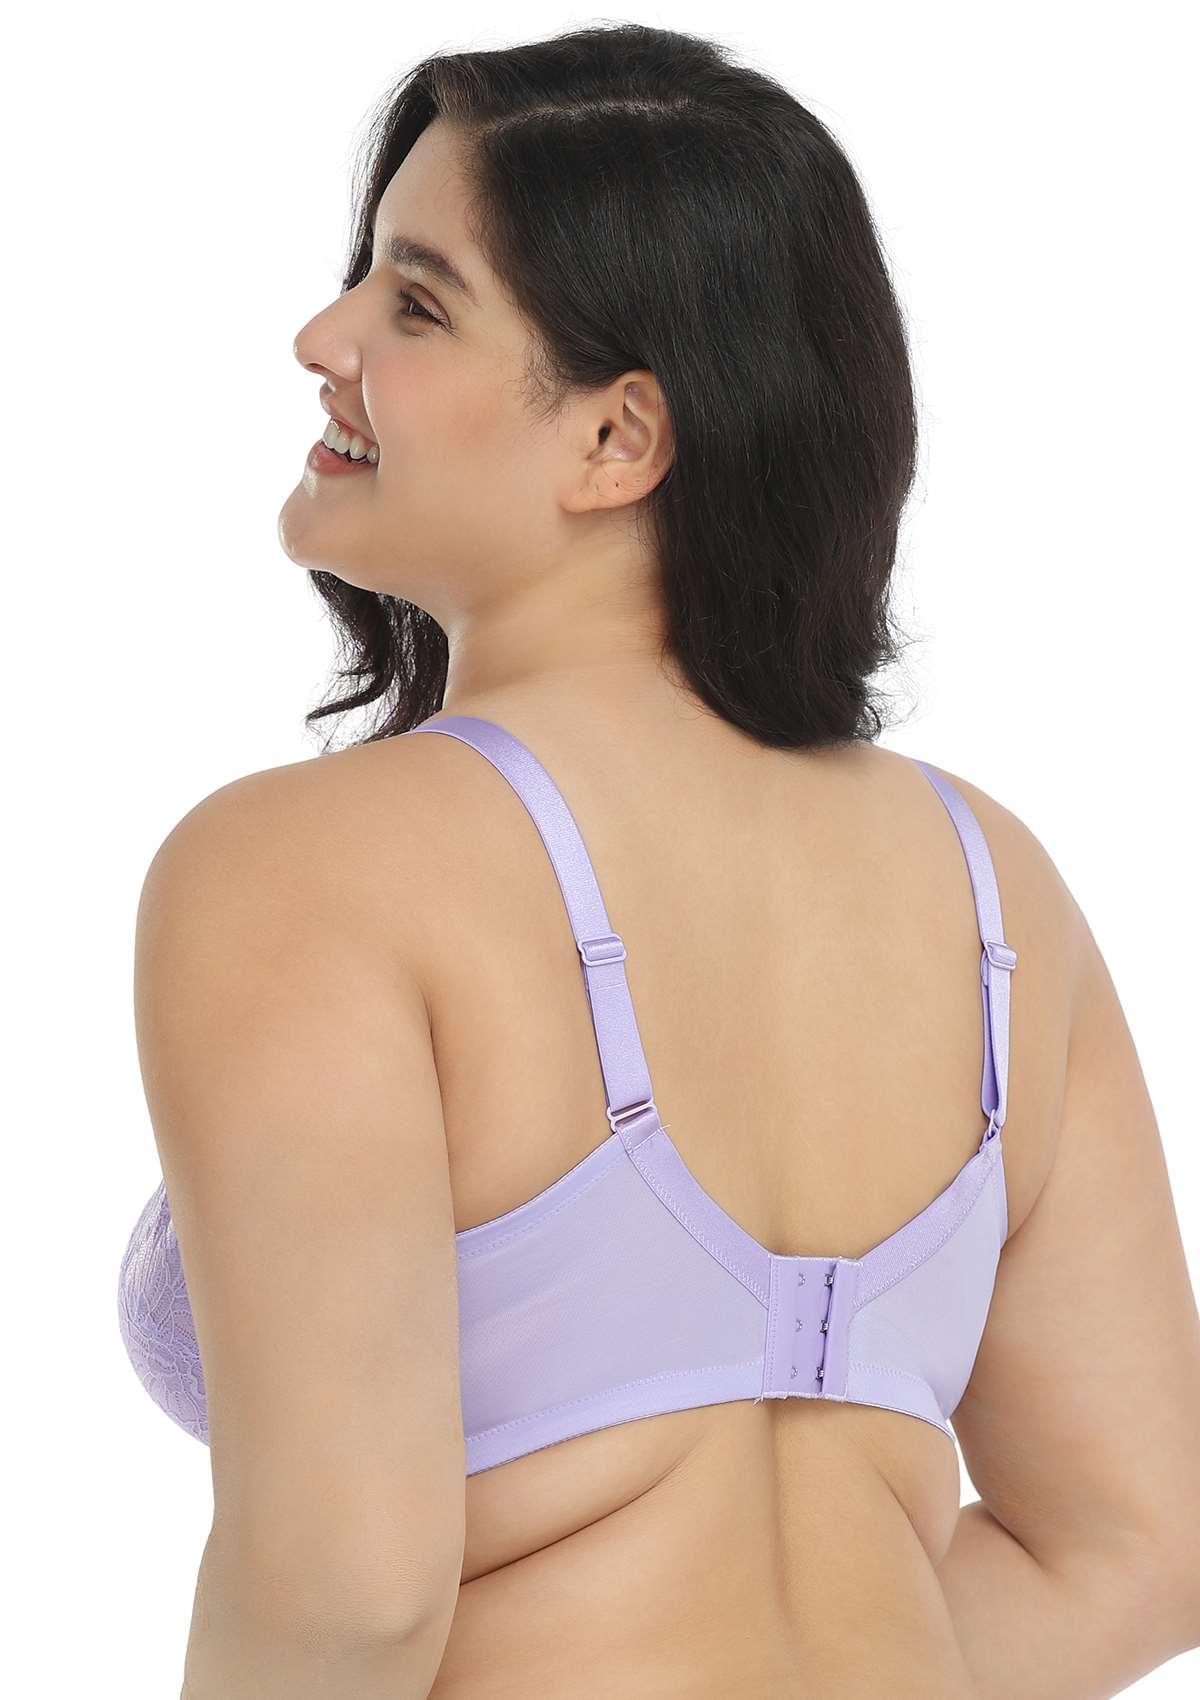 HSIA Blossom Transparent Lace Bra: Plus Size Wired Back Smoothing Bra - Purple / 40 / C